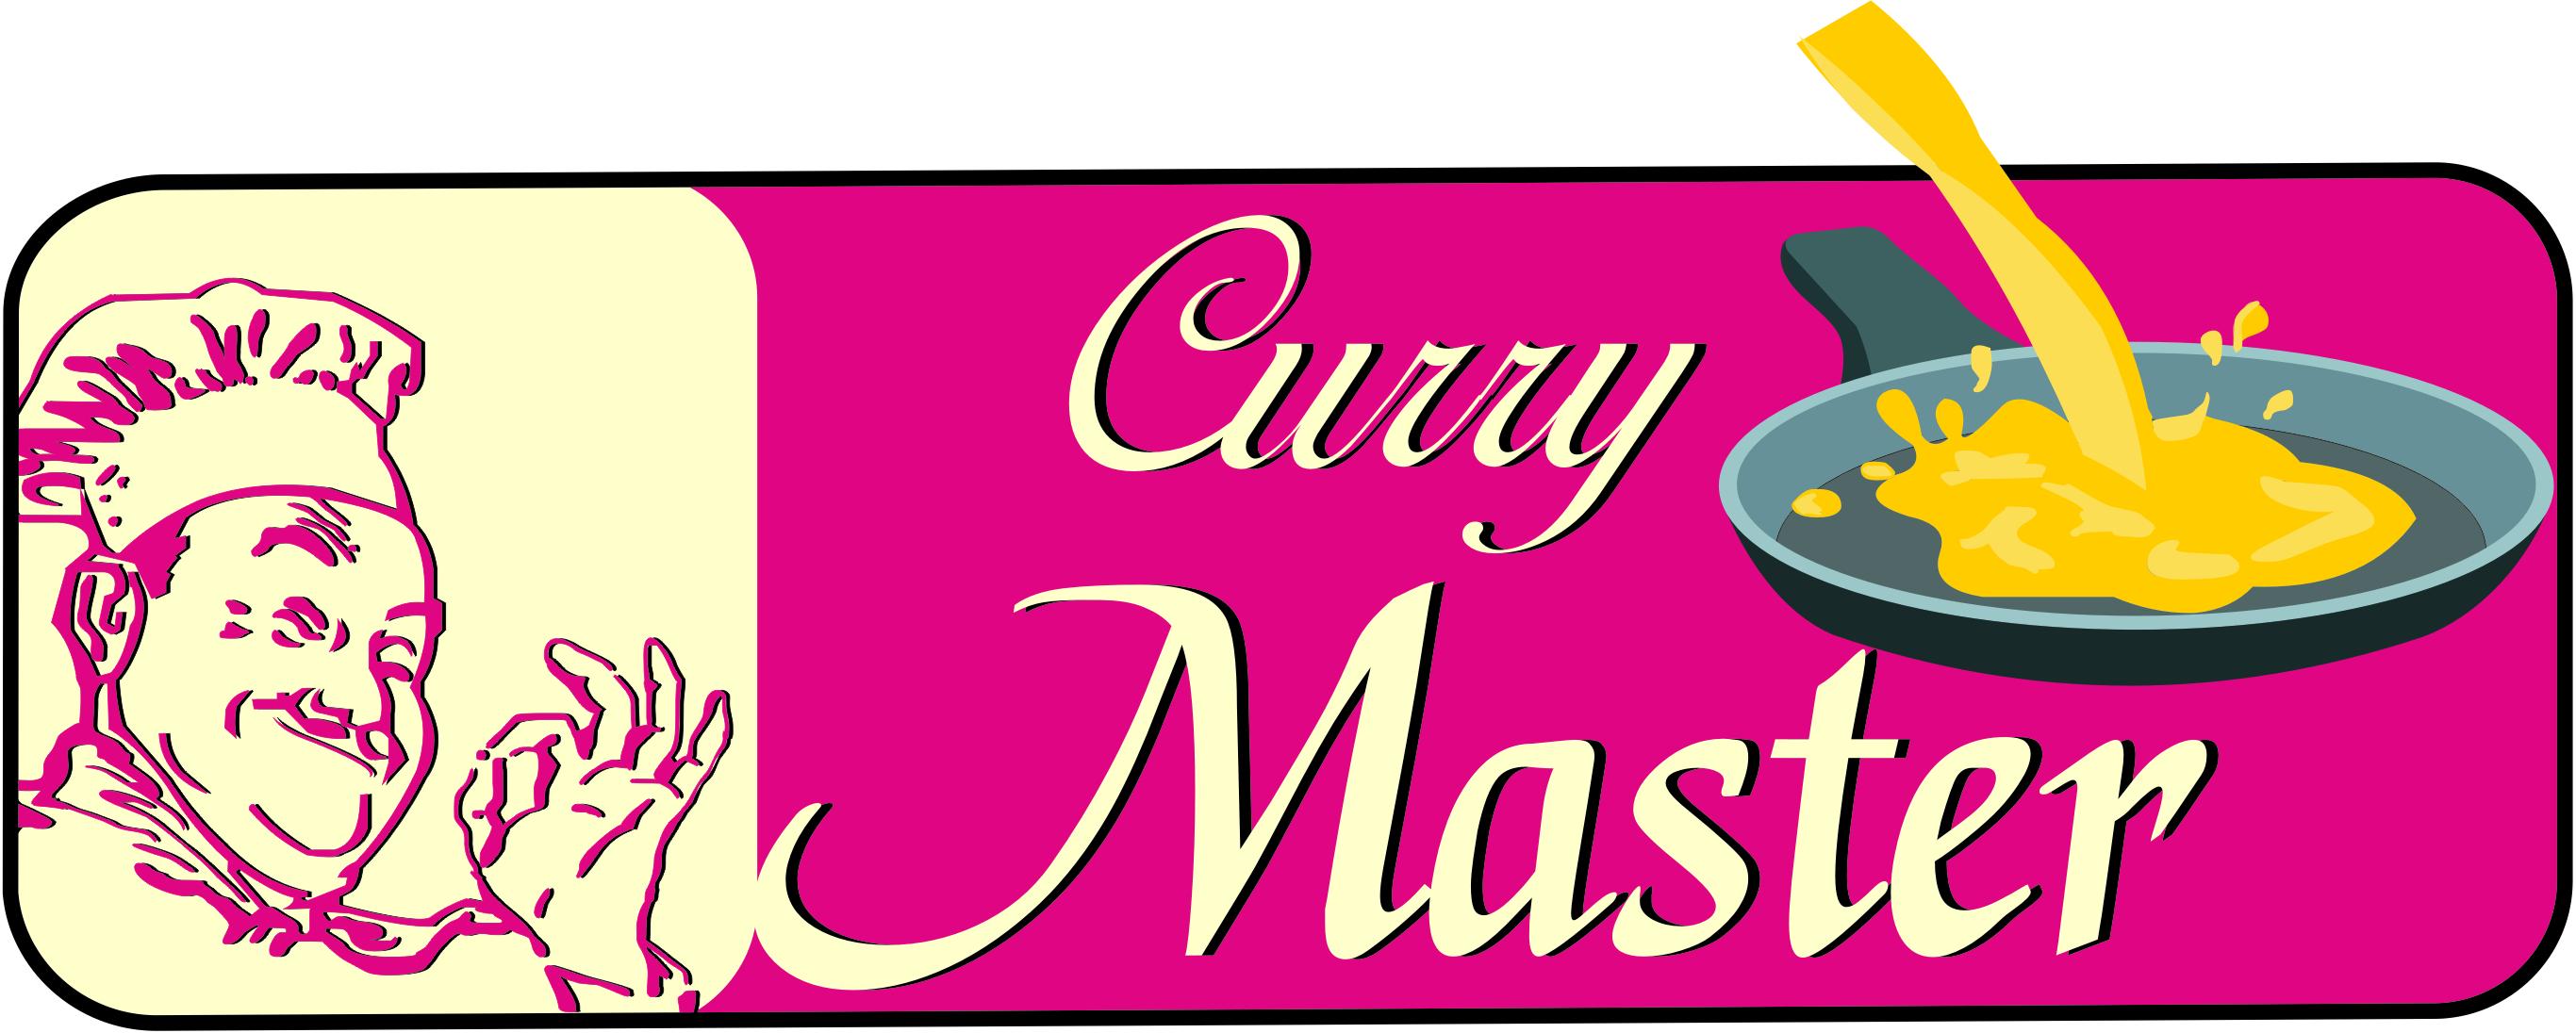 Curry Master Spices